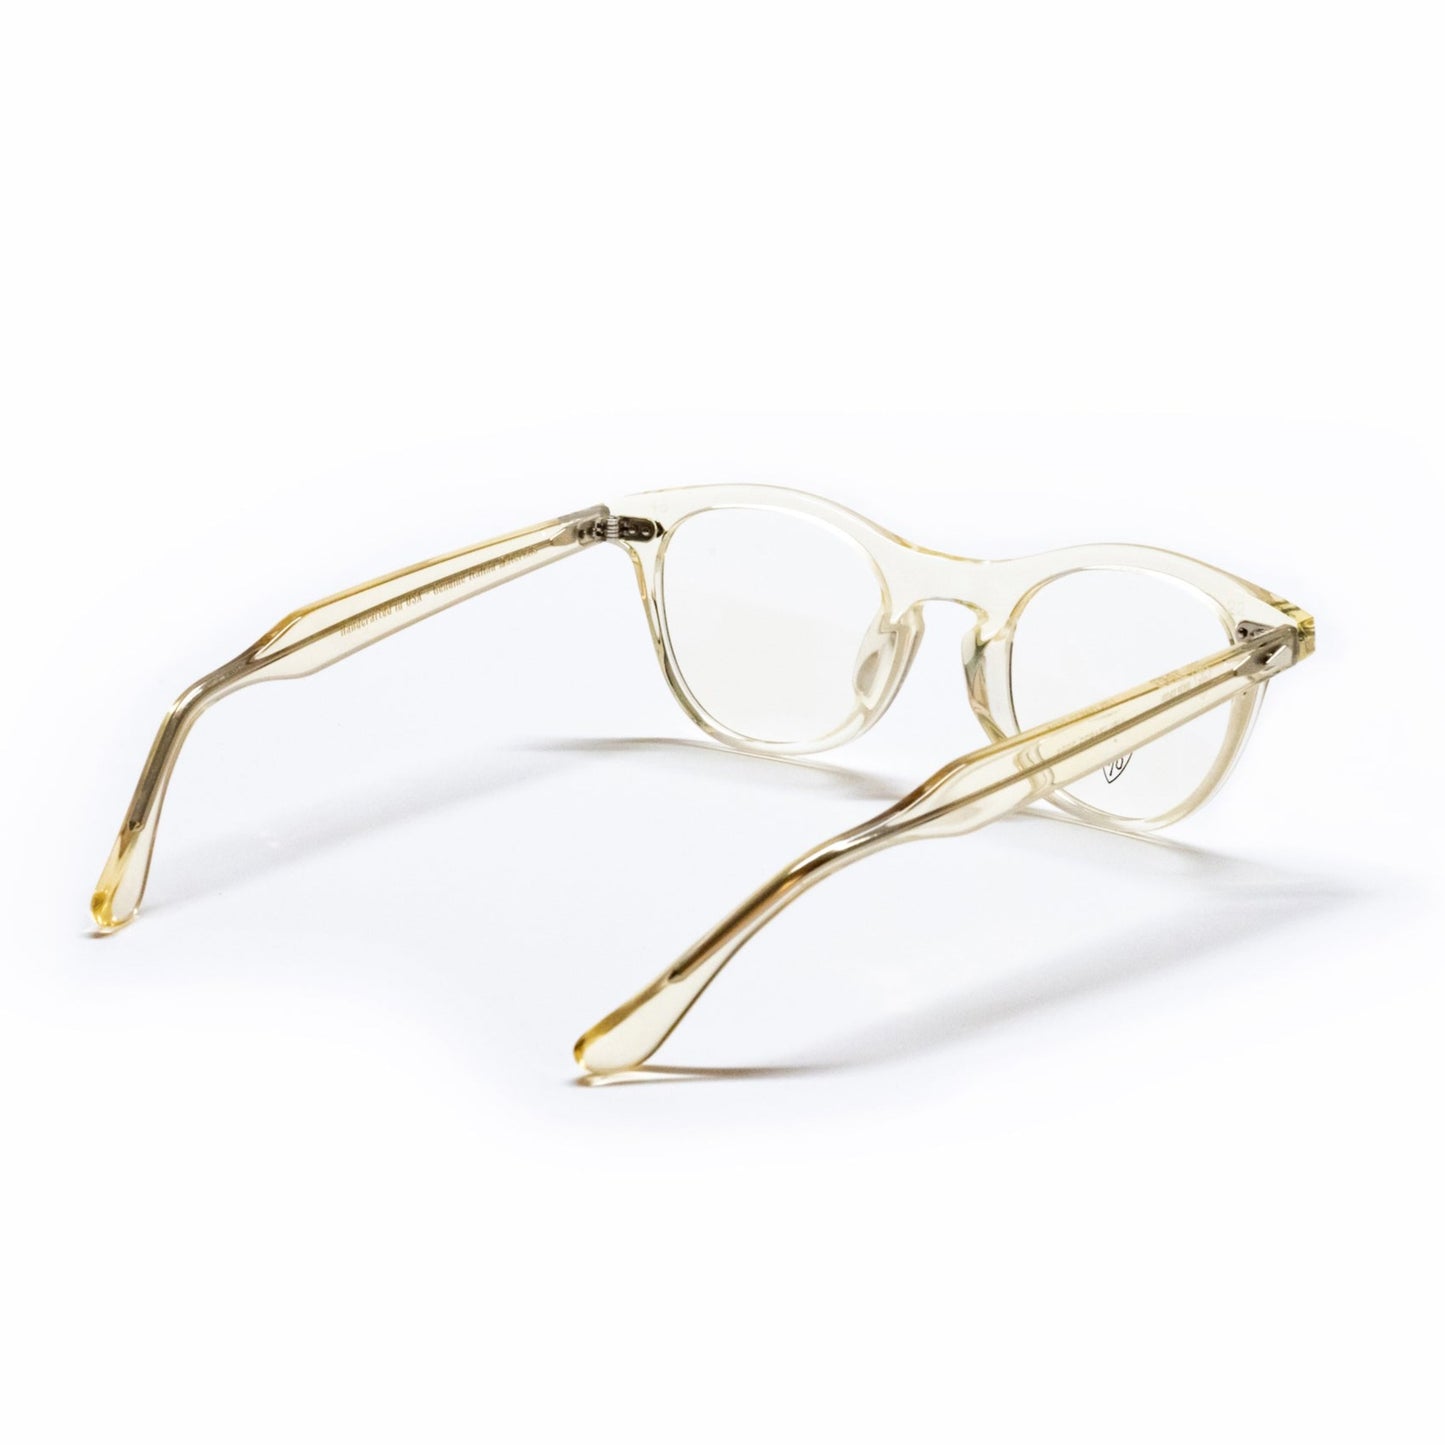 A back view of the champaign Leading Liz frame, the luxury cat-eye fashion glasses.